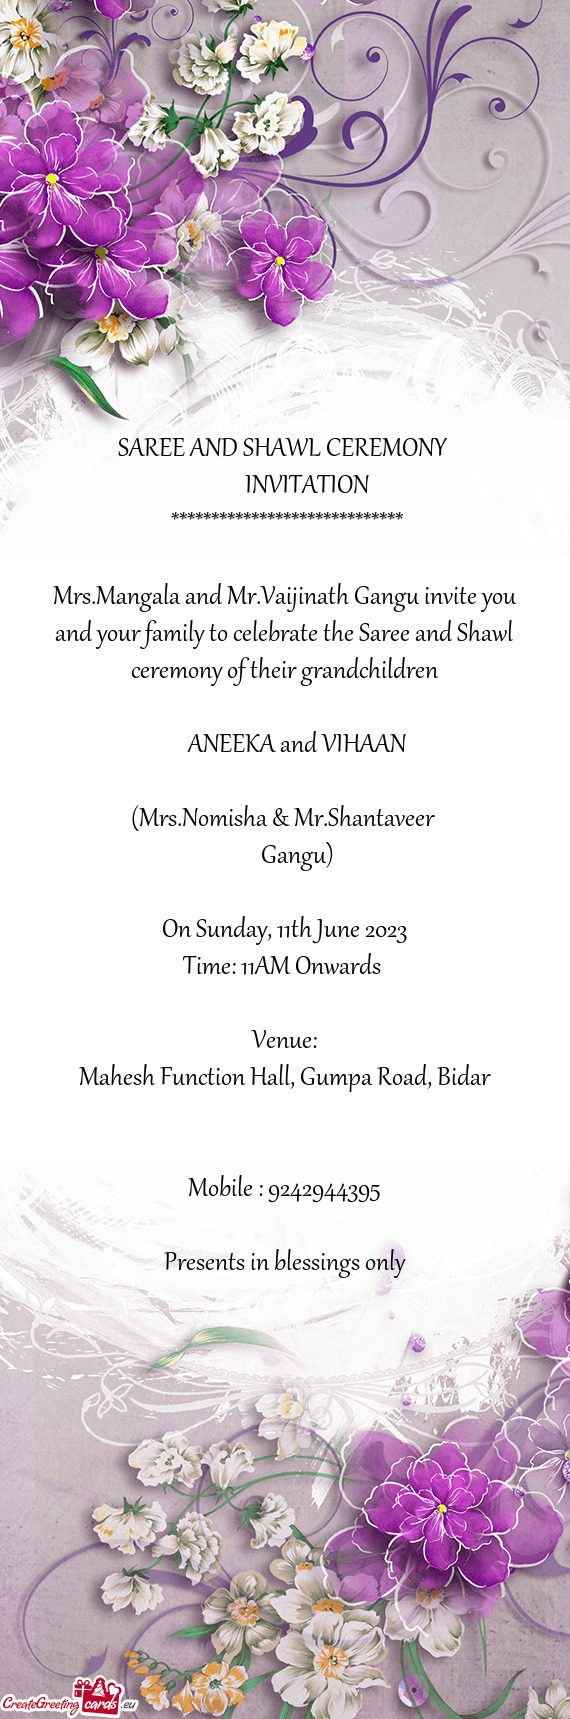 Mrs.Mangala and Mr.Vaijinath Gangu invite you and your family to celebrate the Saree and Shawl cerem